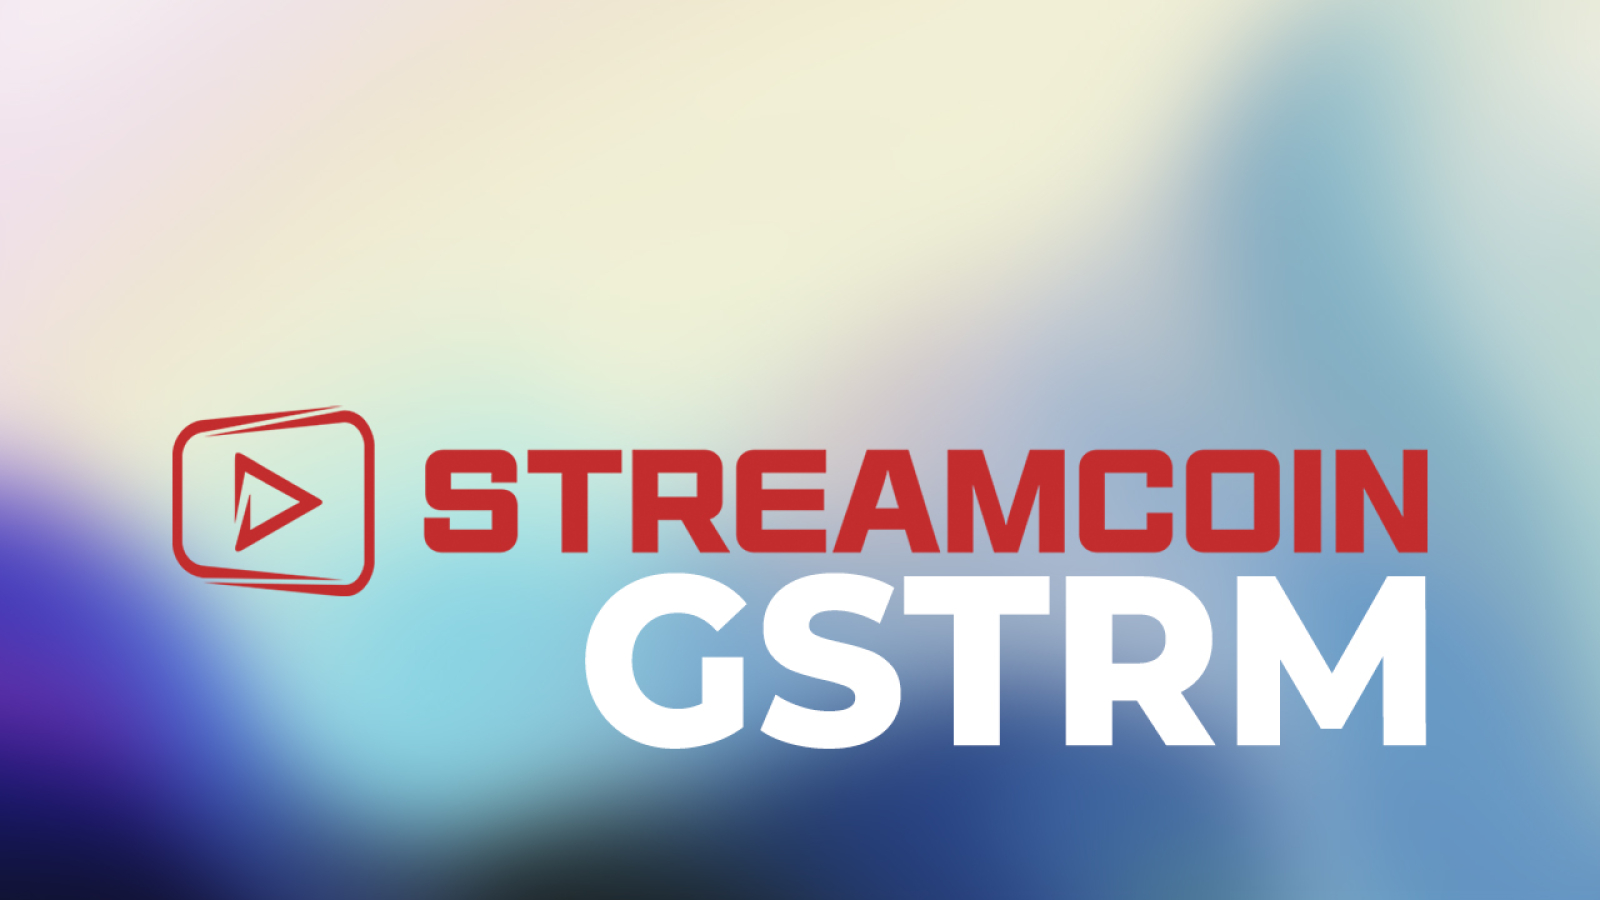 StreamCoin’s Latest Announcement, the GaStream (GSTRM) Utility Token With an Airdrop To Follow